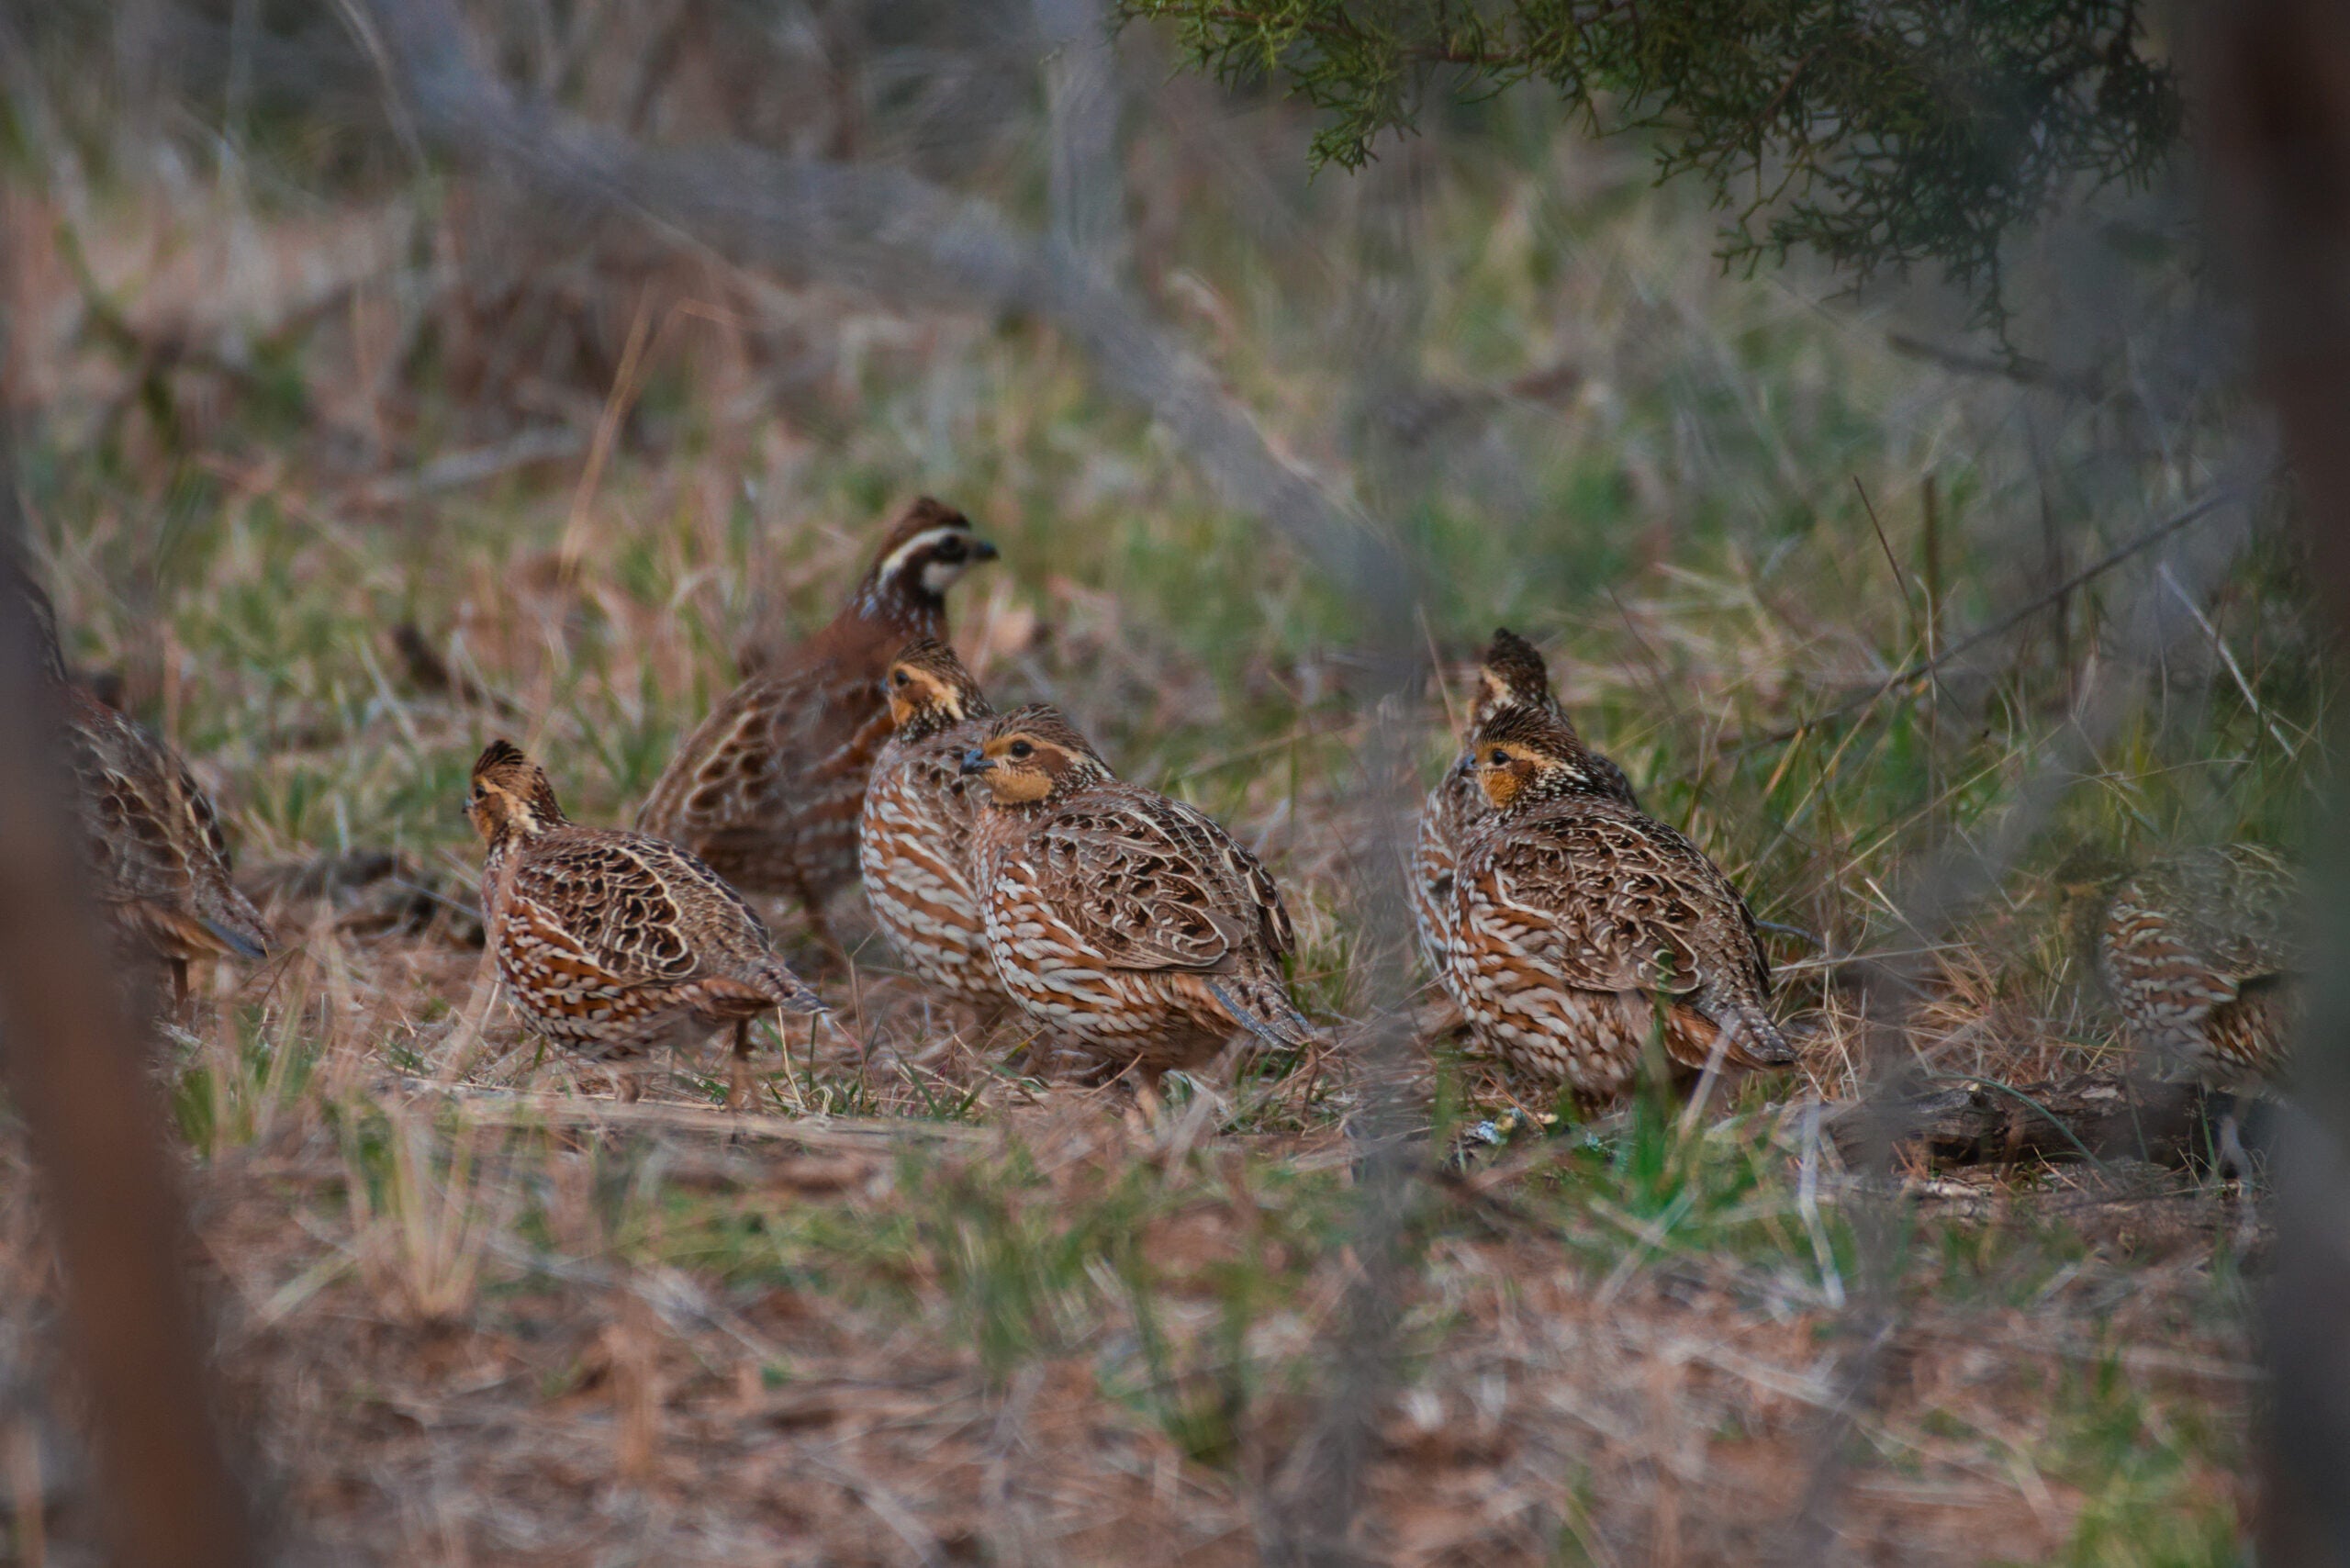 A covey of quail in thick brush